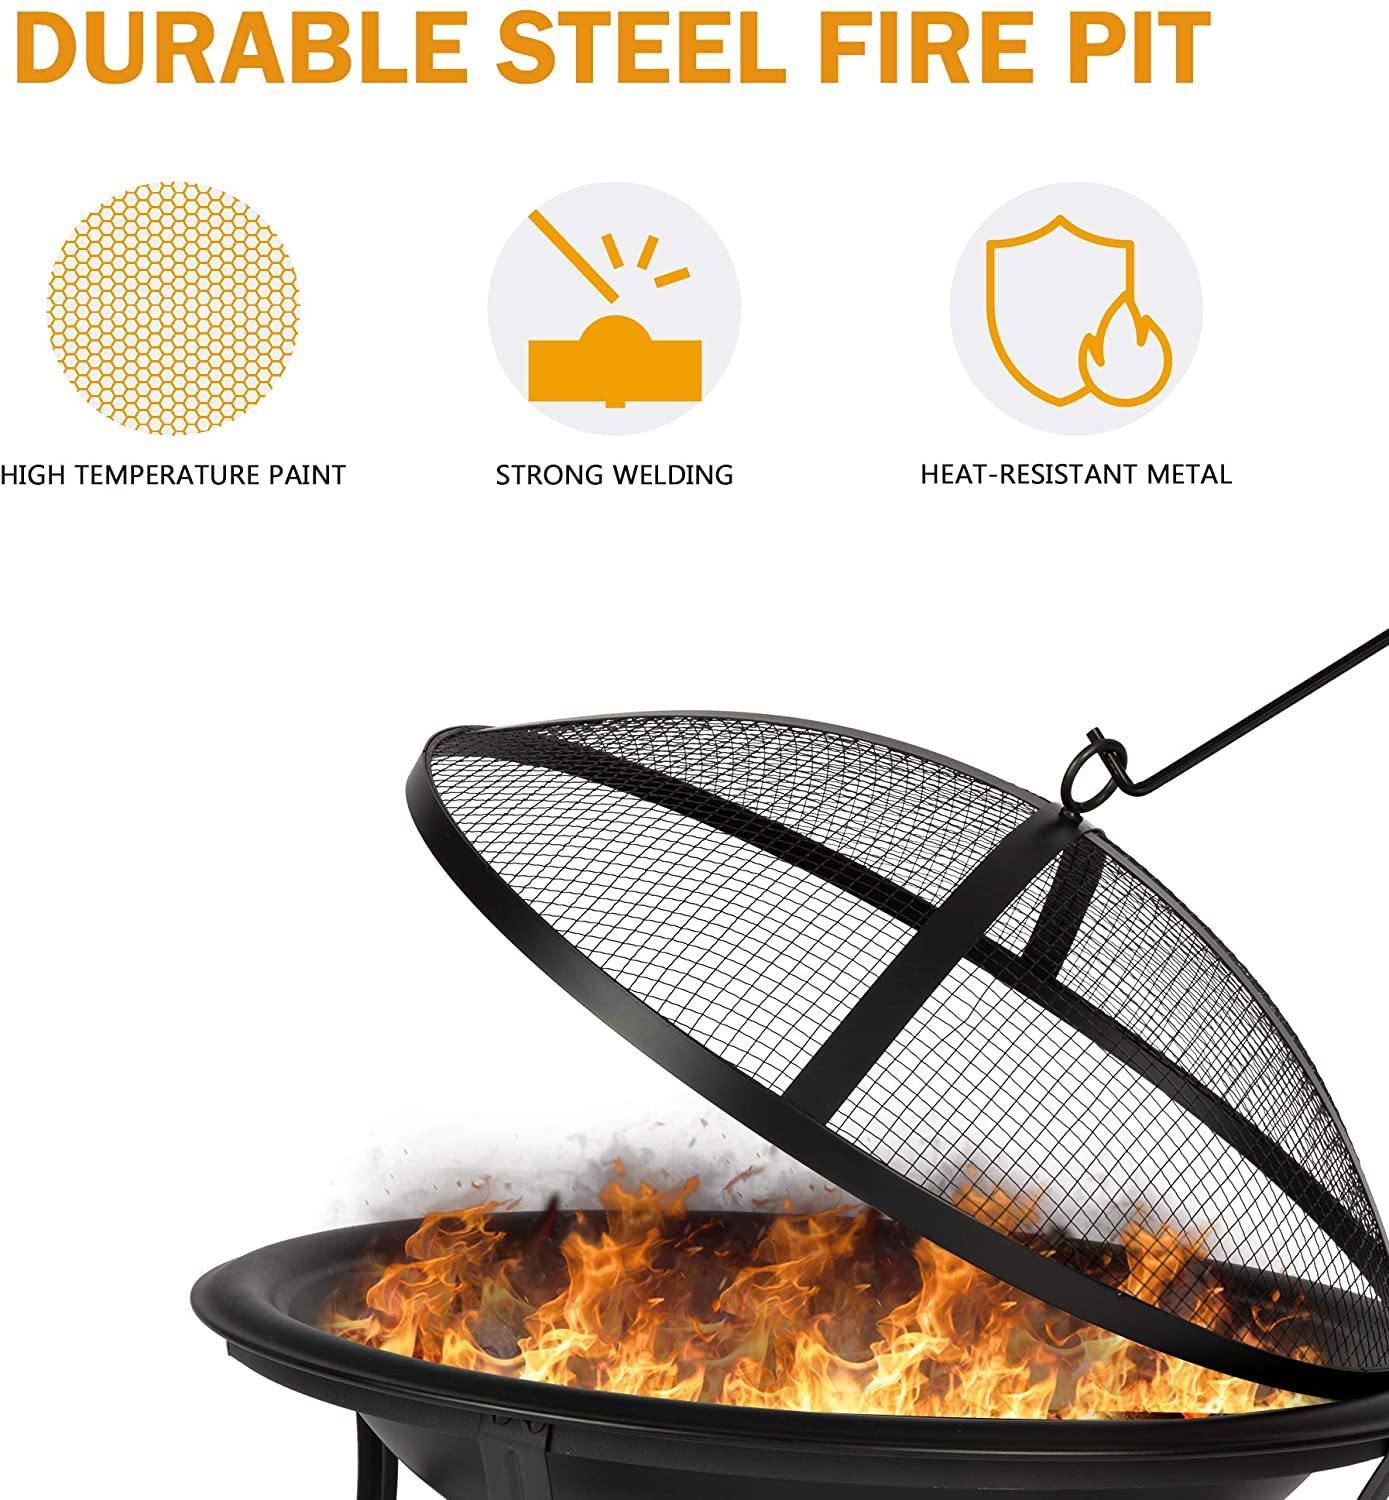 Bosonshop 22'' Outdoor Wood Burning BBQ Grill Firepit Bowl w/Spark Round Mesh Spark Screen Cover Fire Poker Patio Steel Fire Pit Bonfire for Backyard Camping